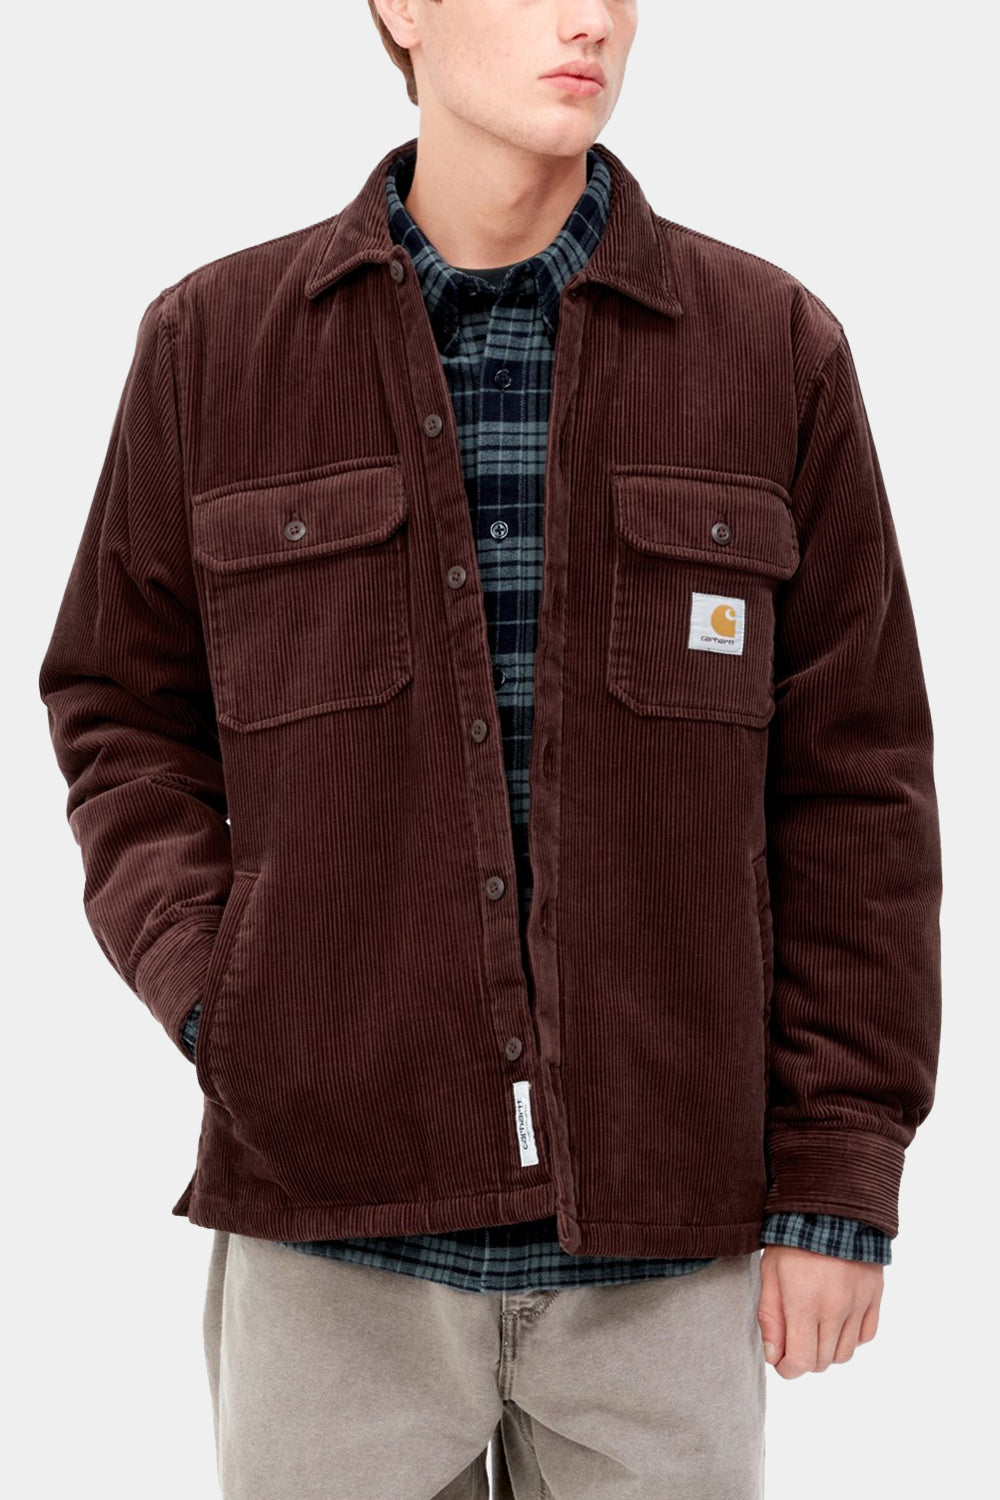 Carhartt WIP Whitsome Shirt Jac (Ale) | Number Six